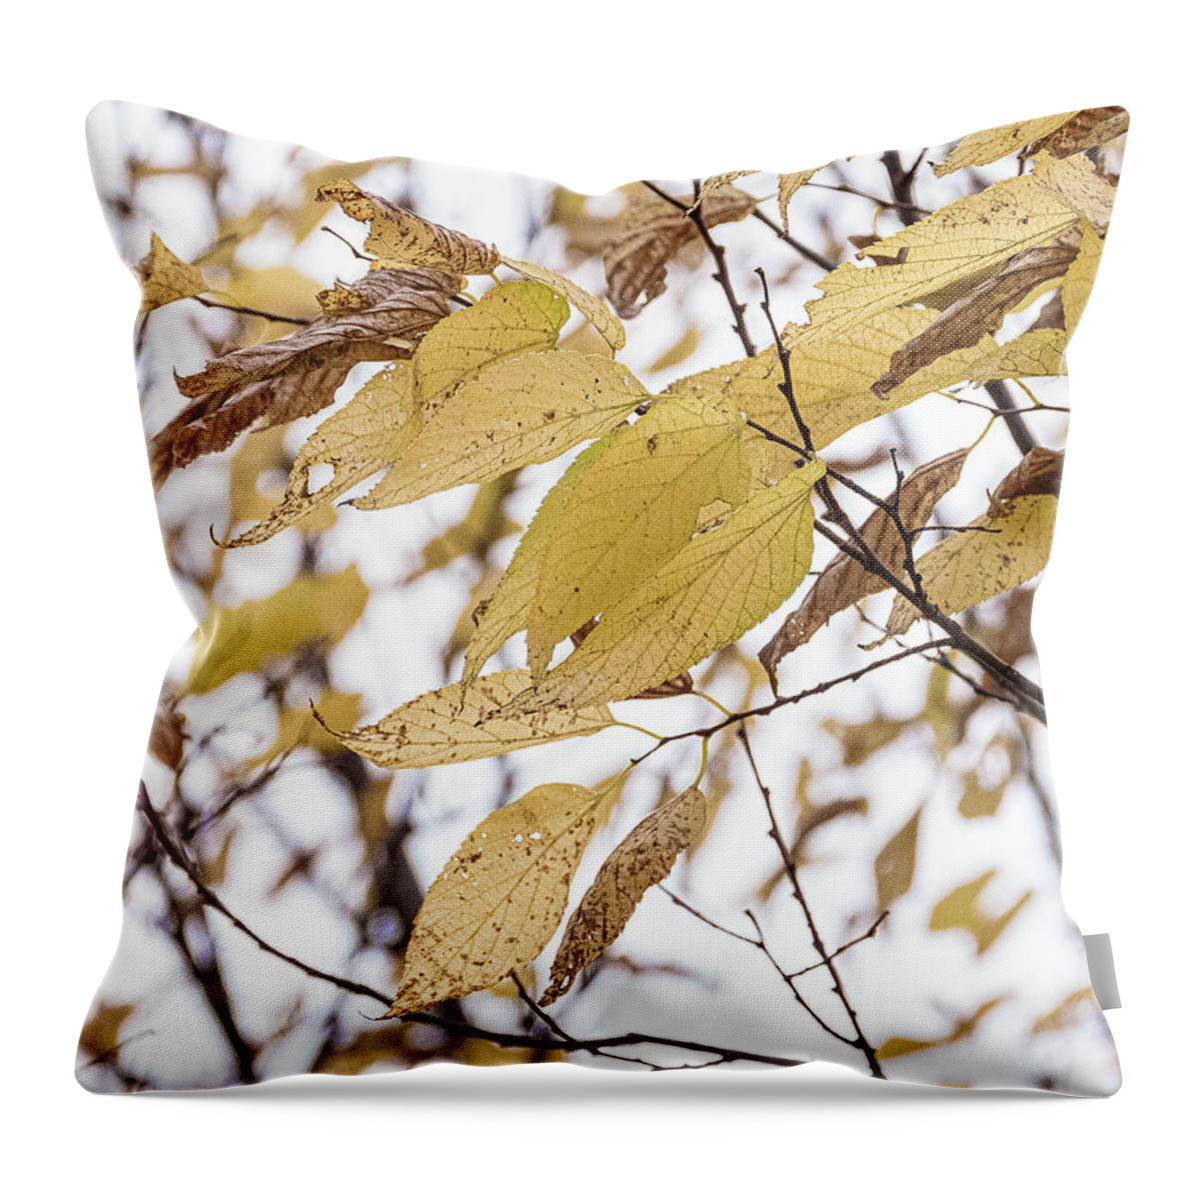 Autumn Yellow Leaves Throw Pillow featuring the photograph Autumn Yellow Leaves by David Morehead